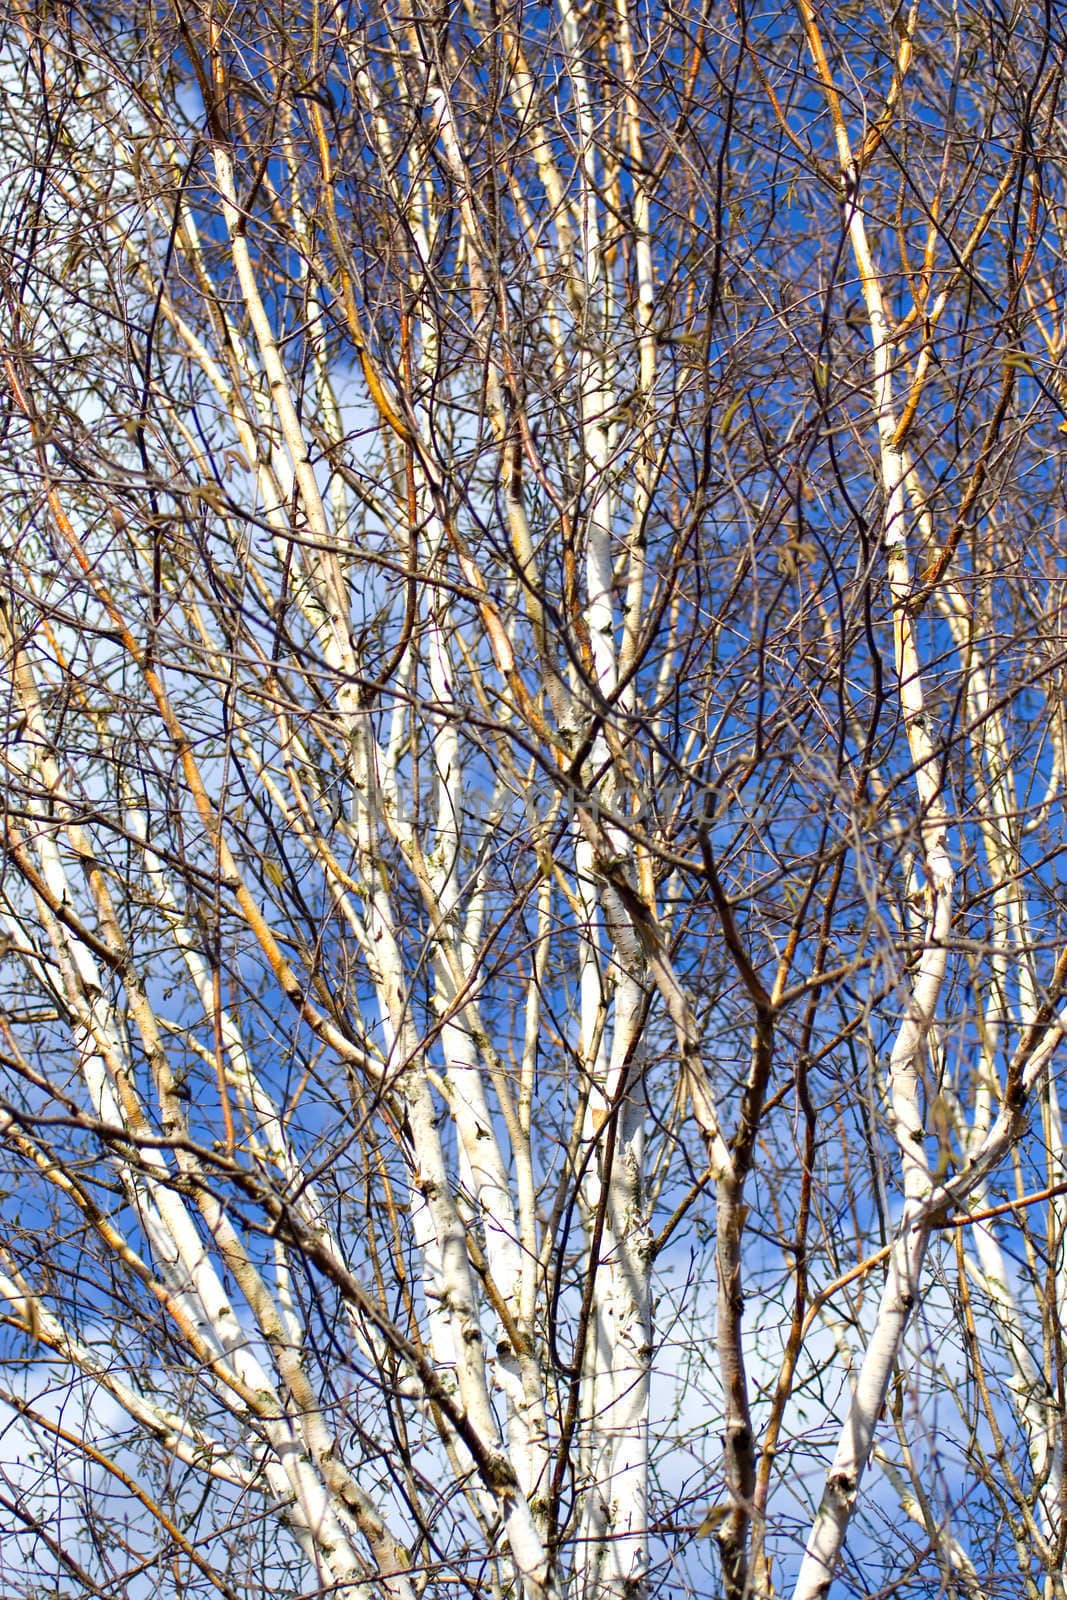 Silver birch trees against a blue sky